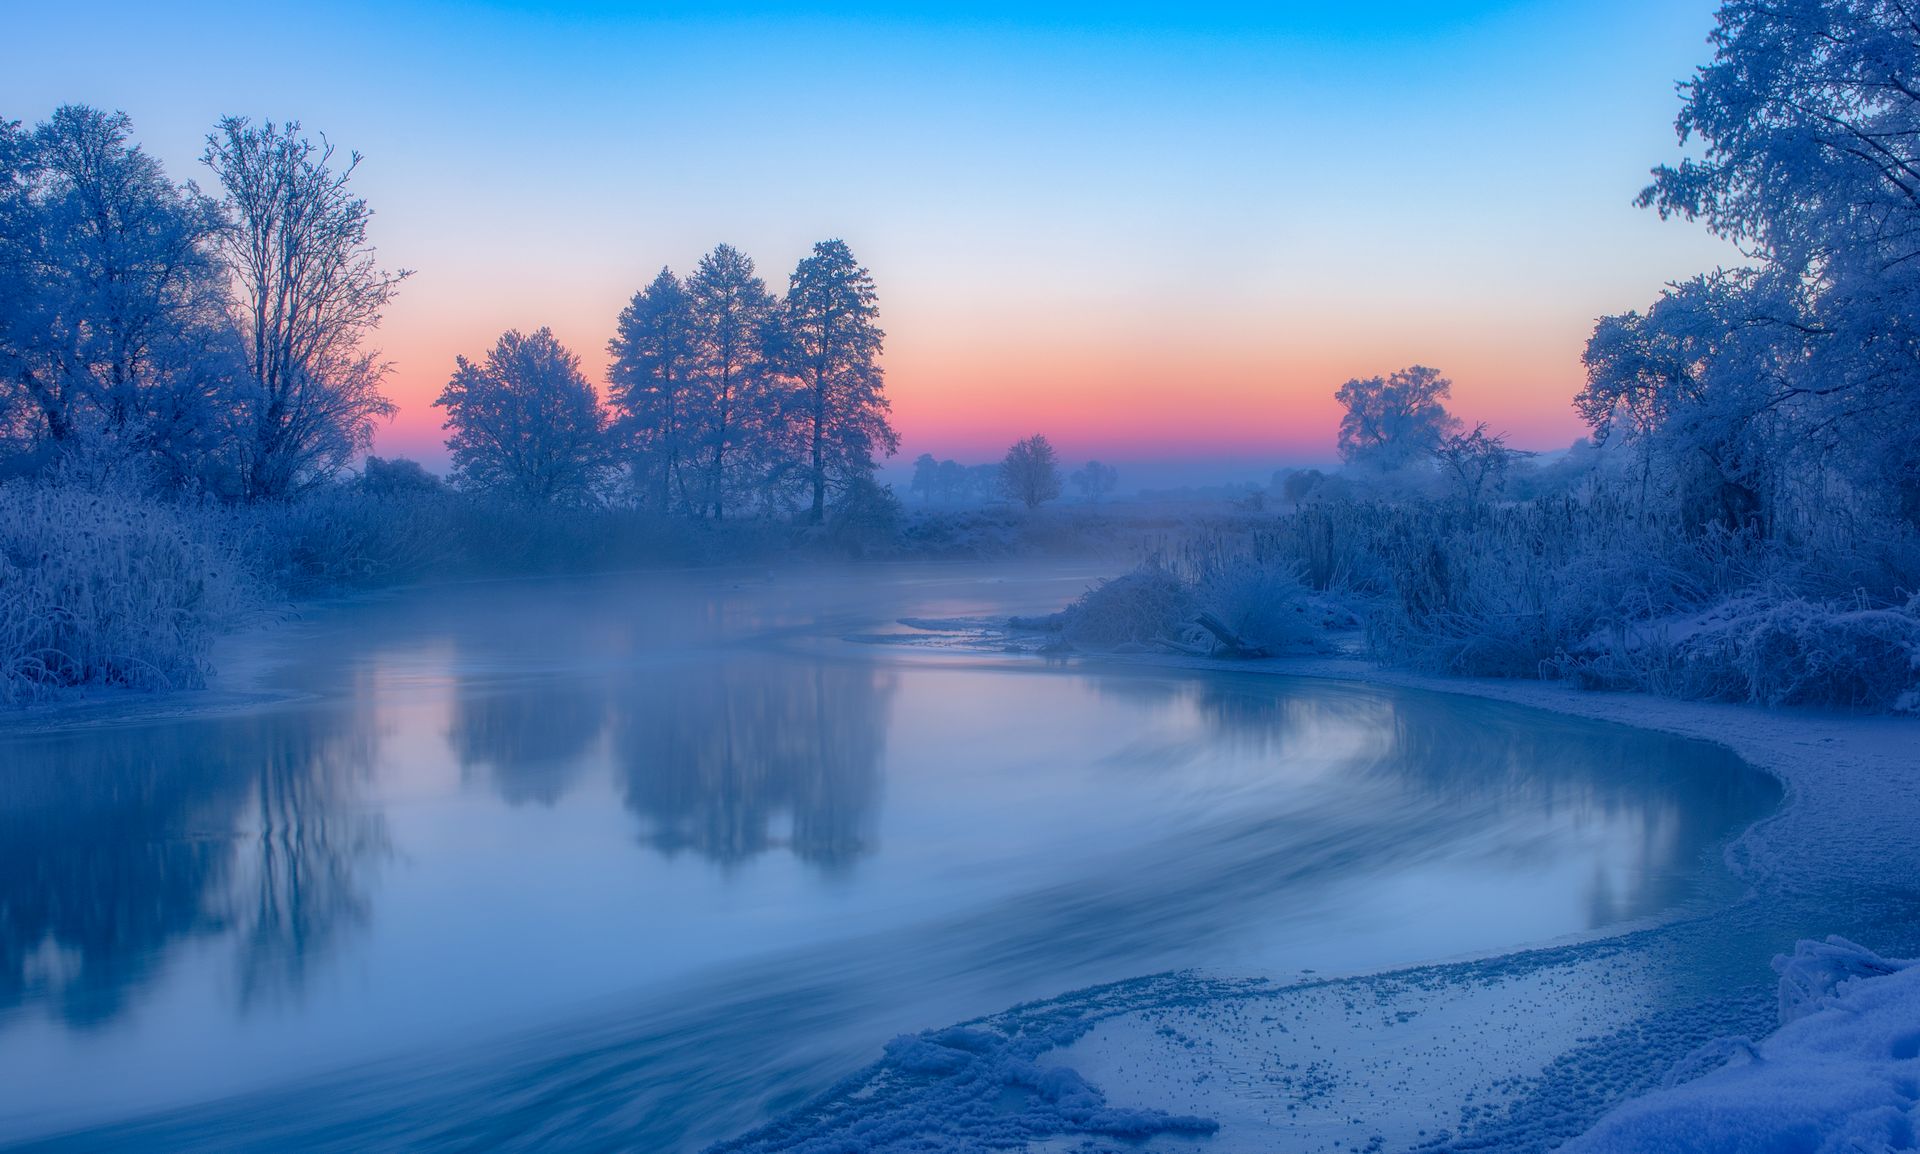 Winter 2021  landscape  nature  snow  frost  river  Gwda  sky -24 degrees  light  trees  Photography Beauty In Nature  Cold Temperature  Ice, Krzysztof Tollas